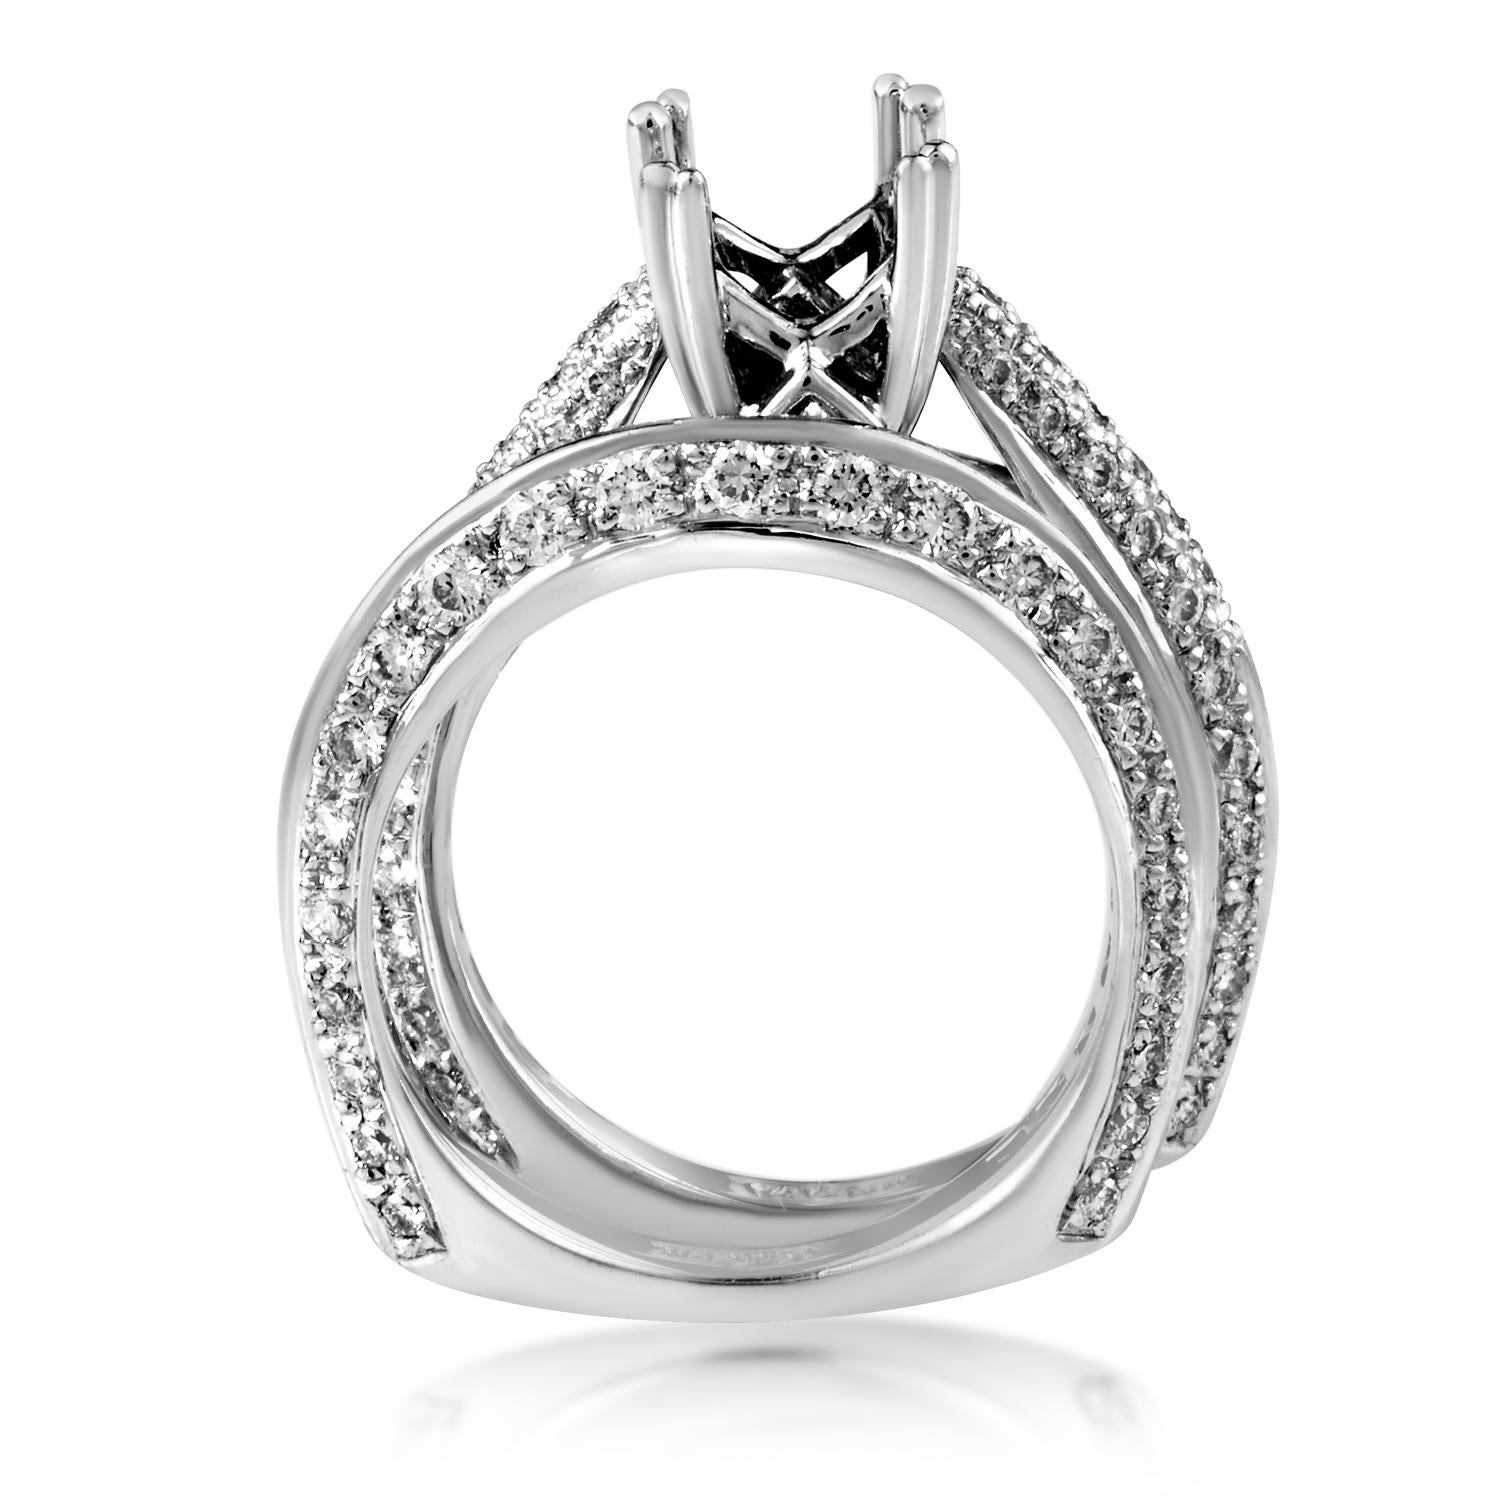 Dazzling and dense arrangement of glittering diamonds weighing in total 1.20 carats enriches both the fantastic mounting ring and fabulous wedding band in this magnificent bridal set from Natalie K made of shimmering 14K white gold.<Br/>Ring Top